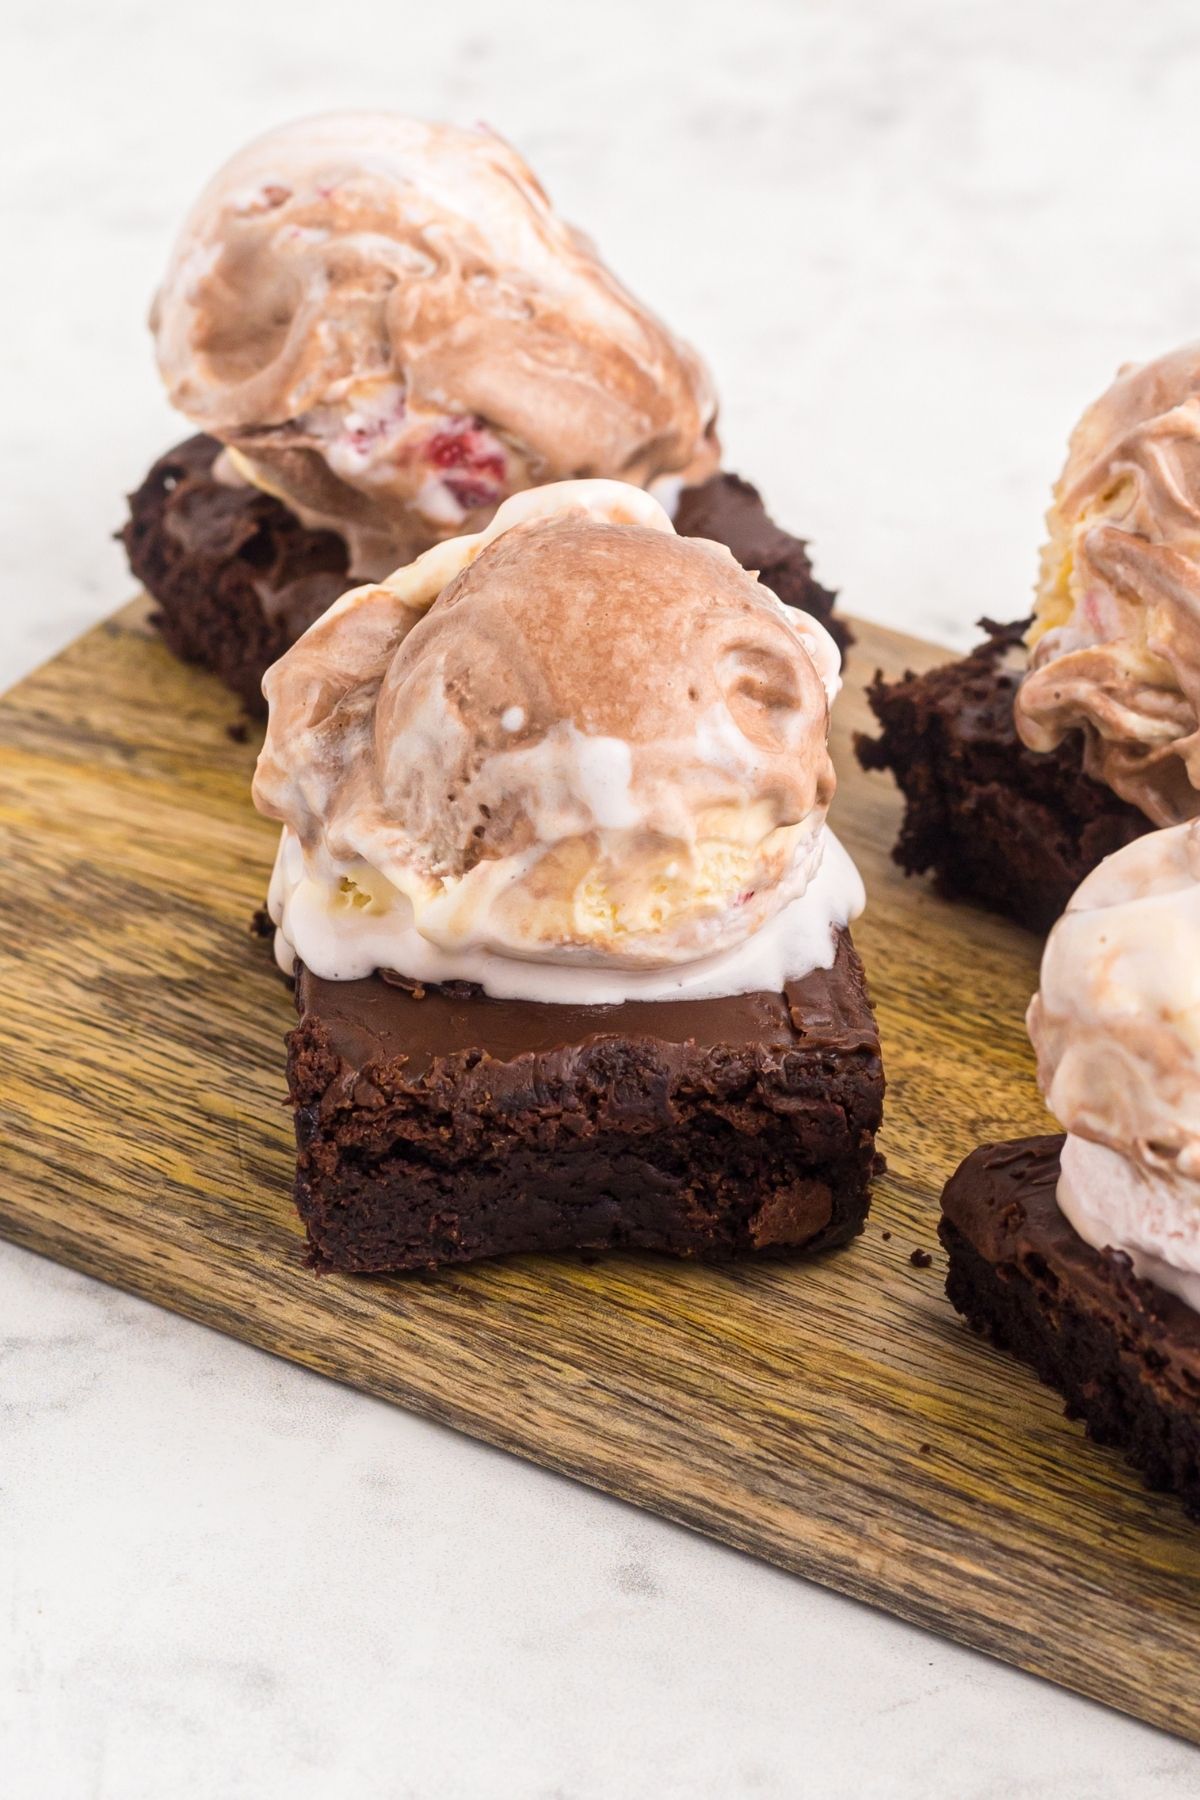 ice cream scooped onto brownies on a wooden cutting board